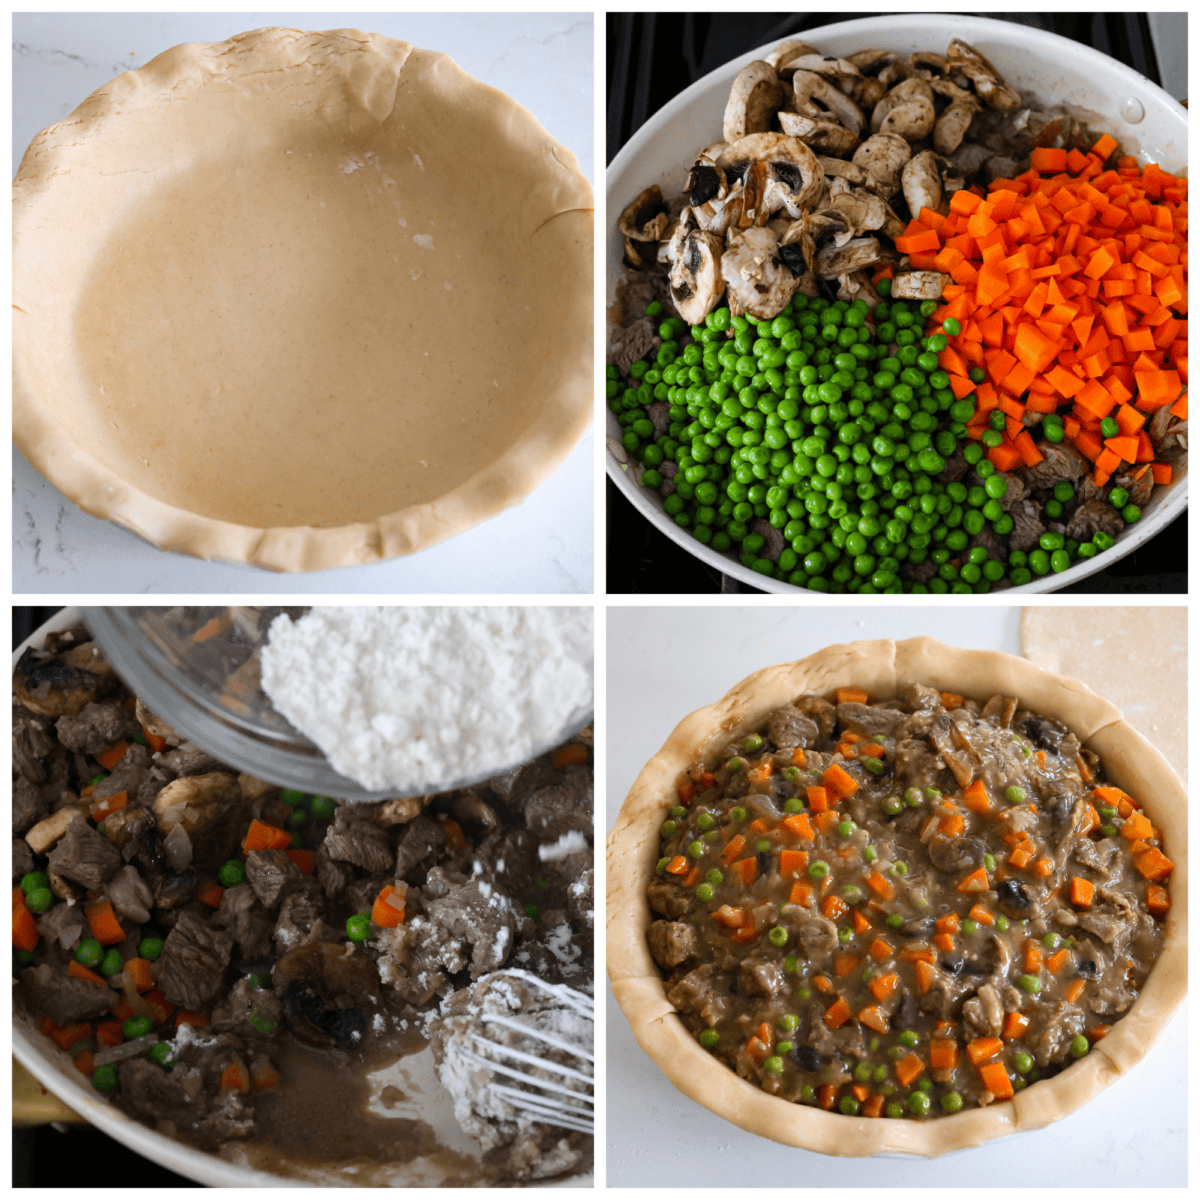 4-photo collage of the beef filling being prepared and added to a pie crust.